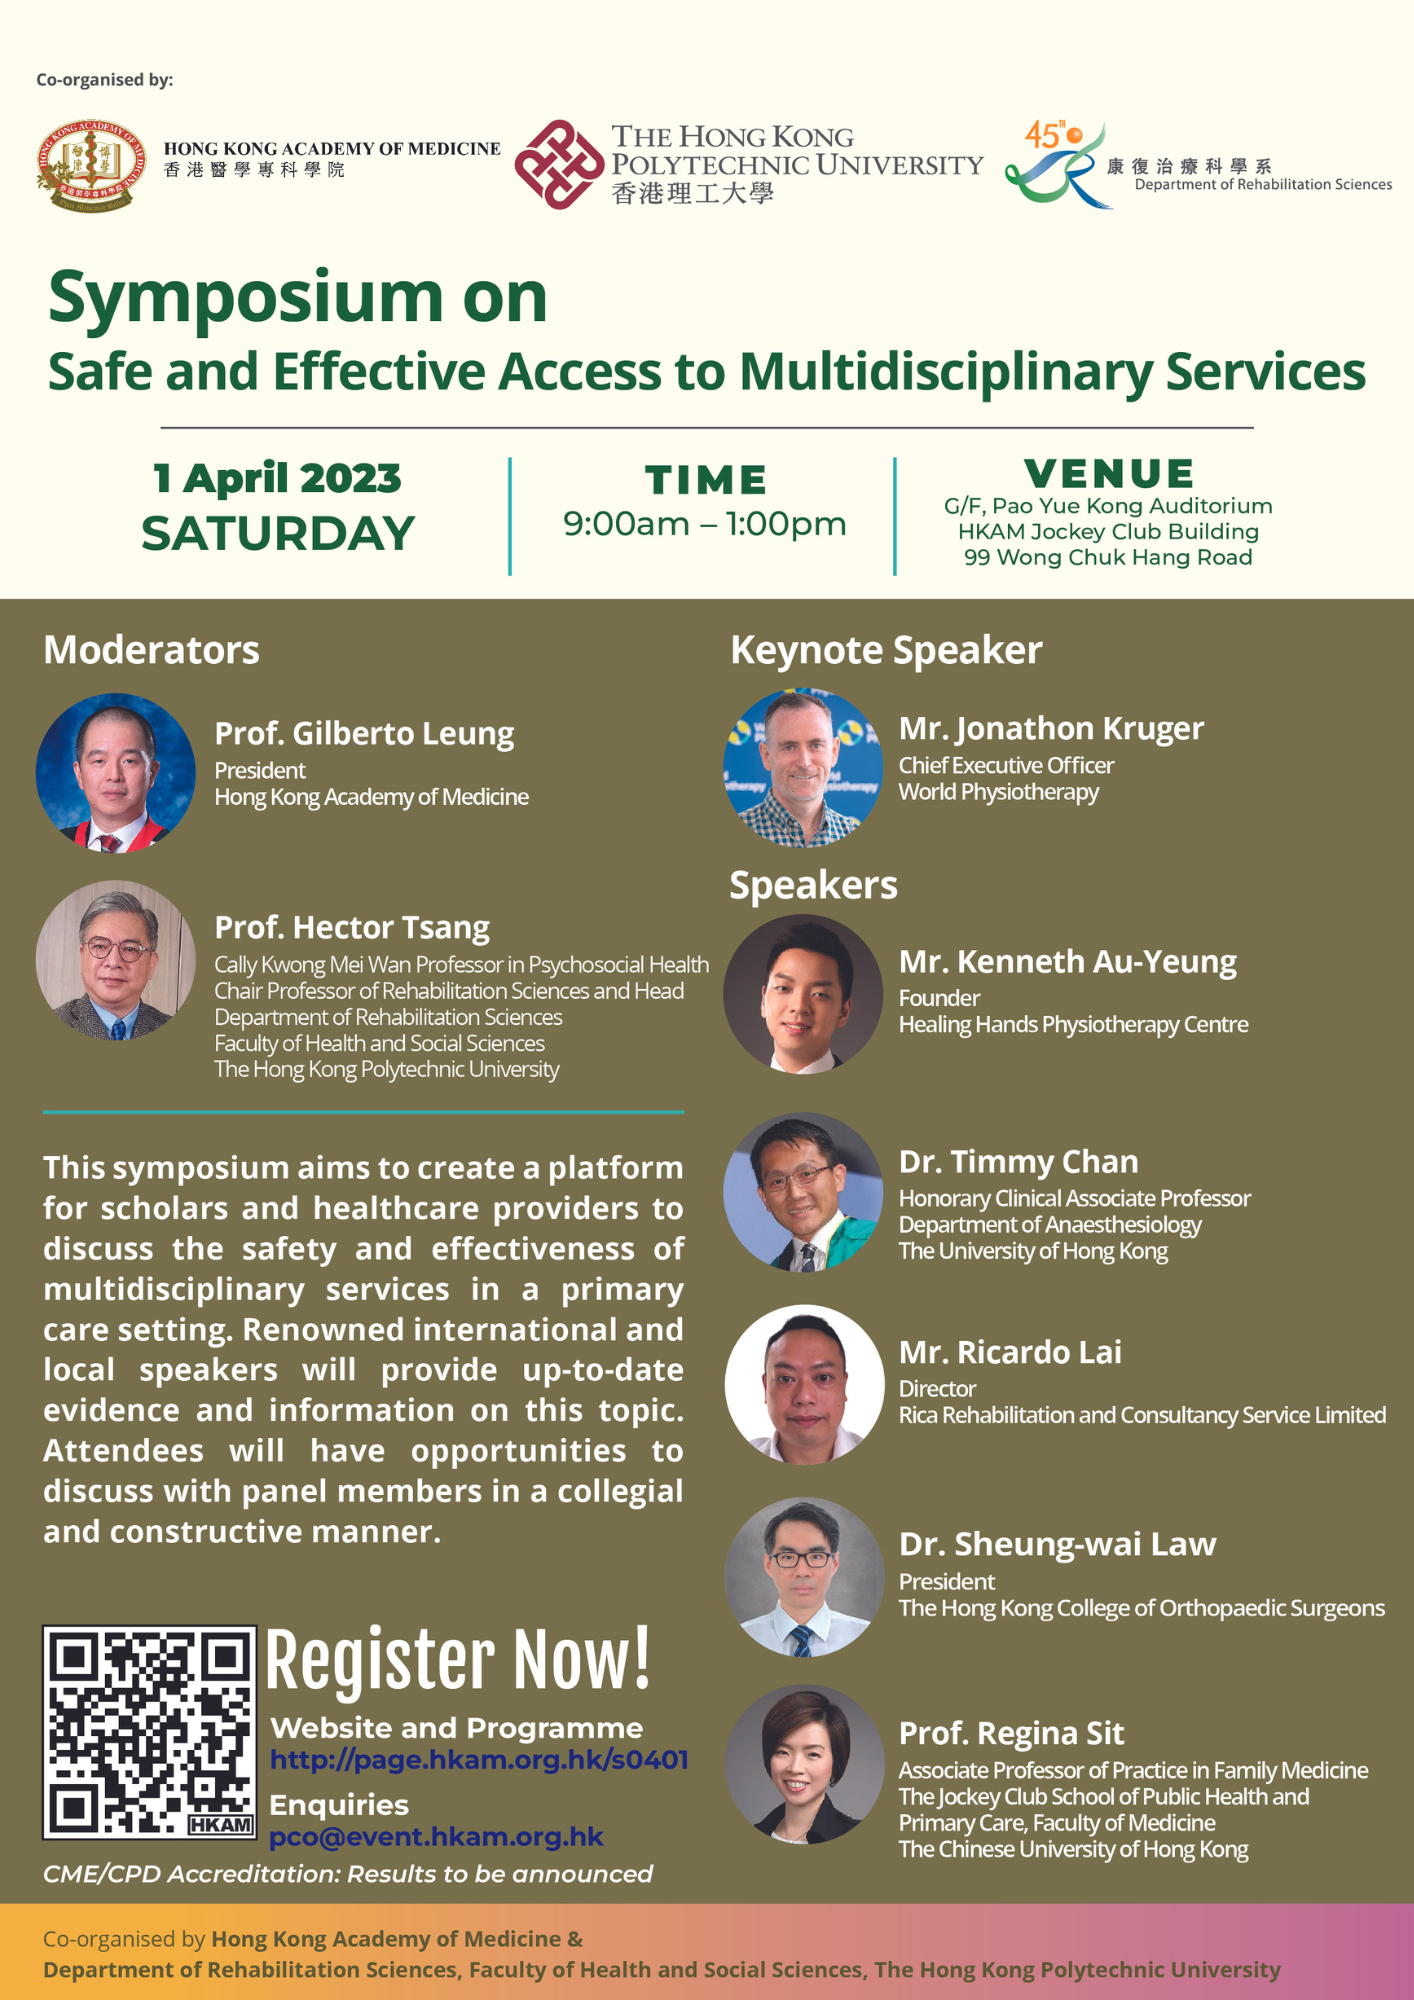 20230228 PosterSymposium on Safe and Effective Access to Multidisciplinary ServicesRGB